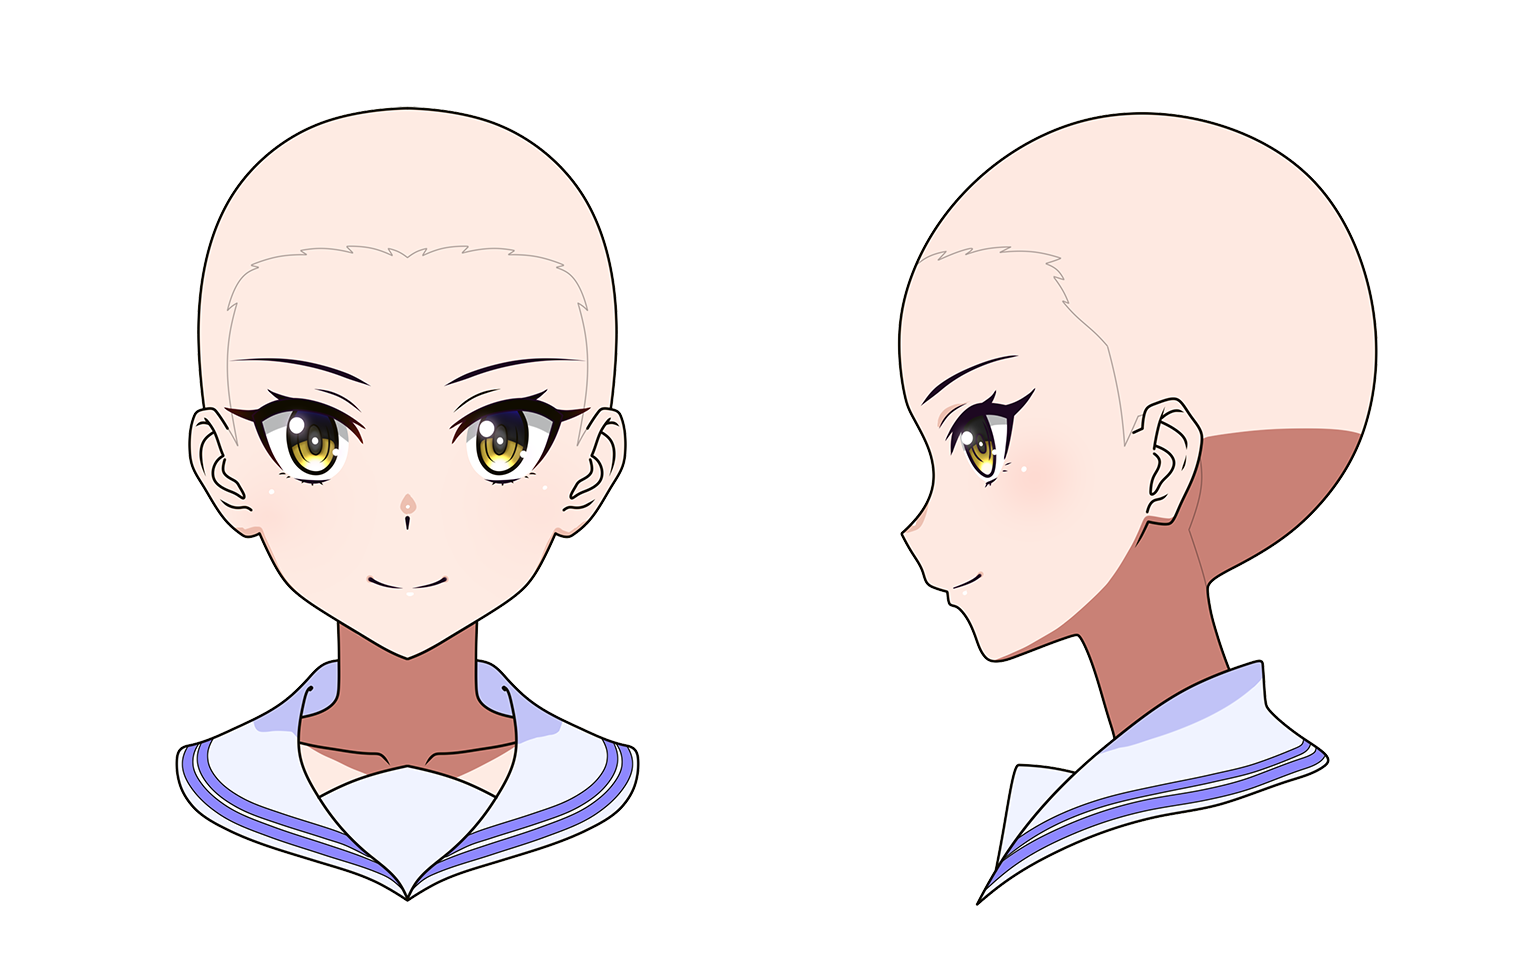 How to draw a side view face anime - Quora